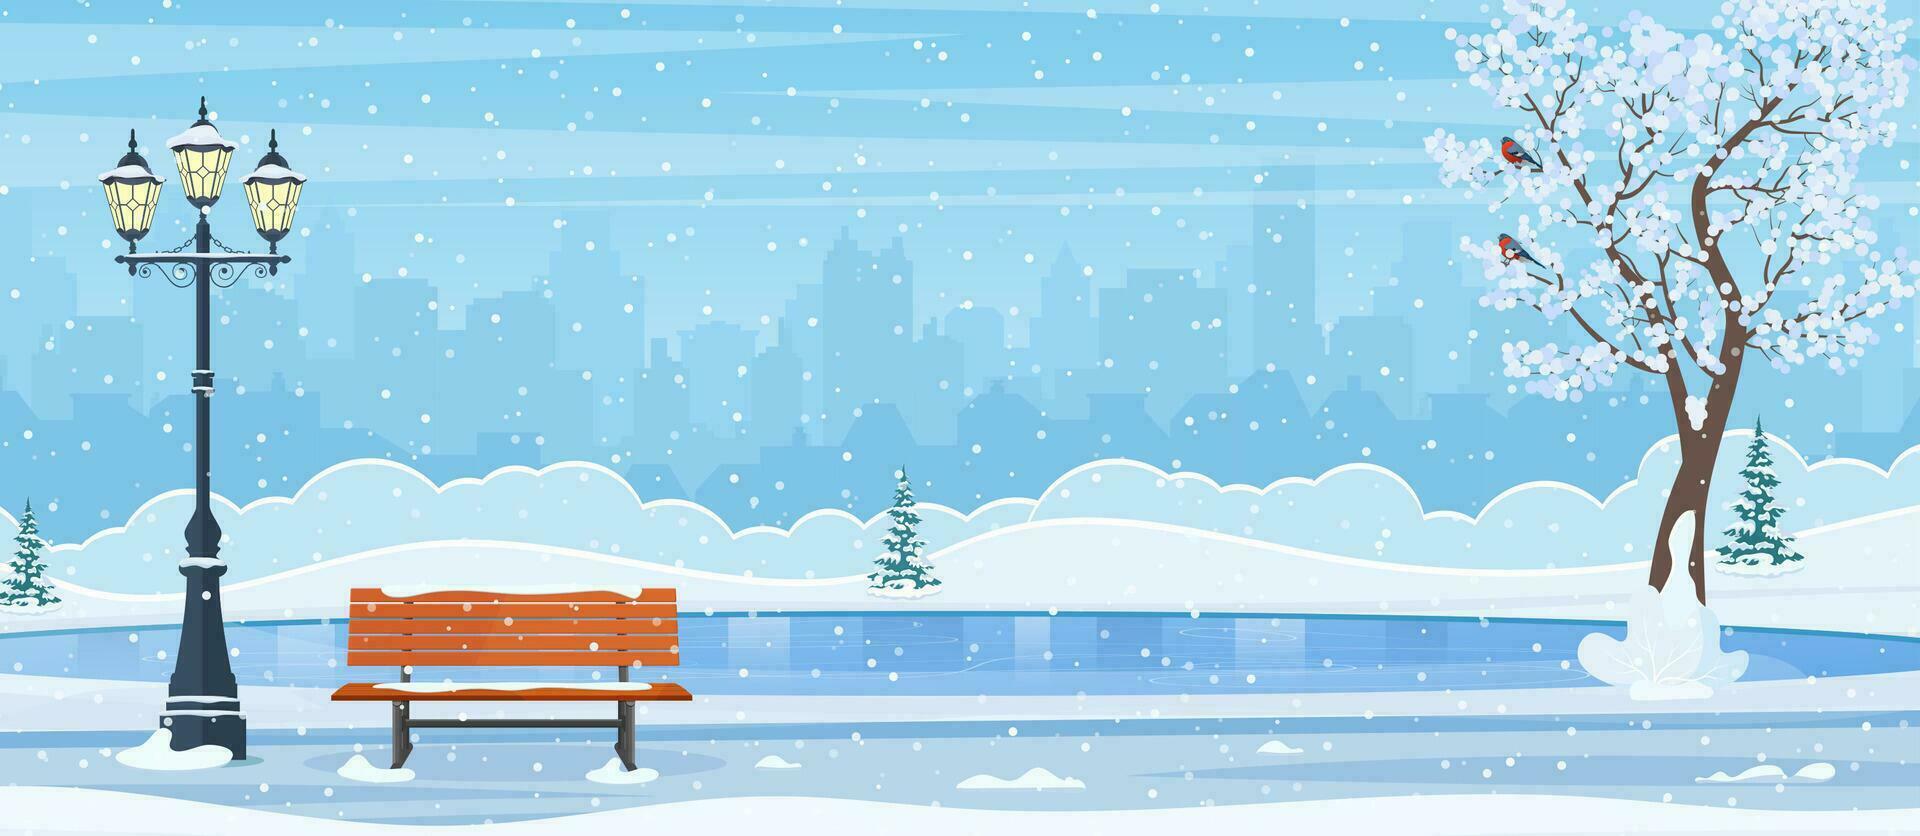 Empty outdoor ice rink for skating and fun winter activities. cartoon frozen landscape. Winter day park scene. Snow covered wooden bench with street lamp. Vector illustration in flat style